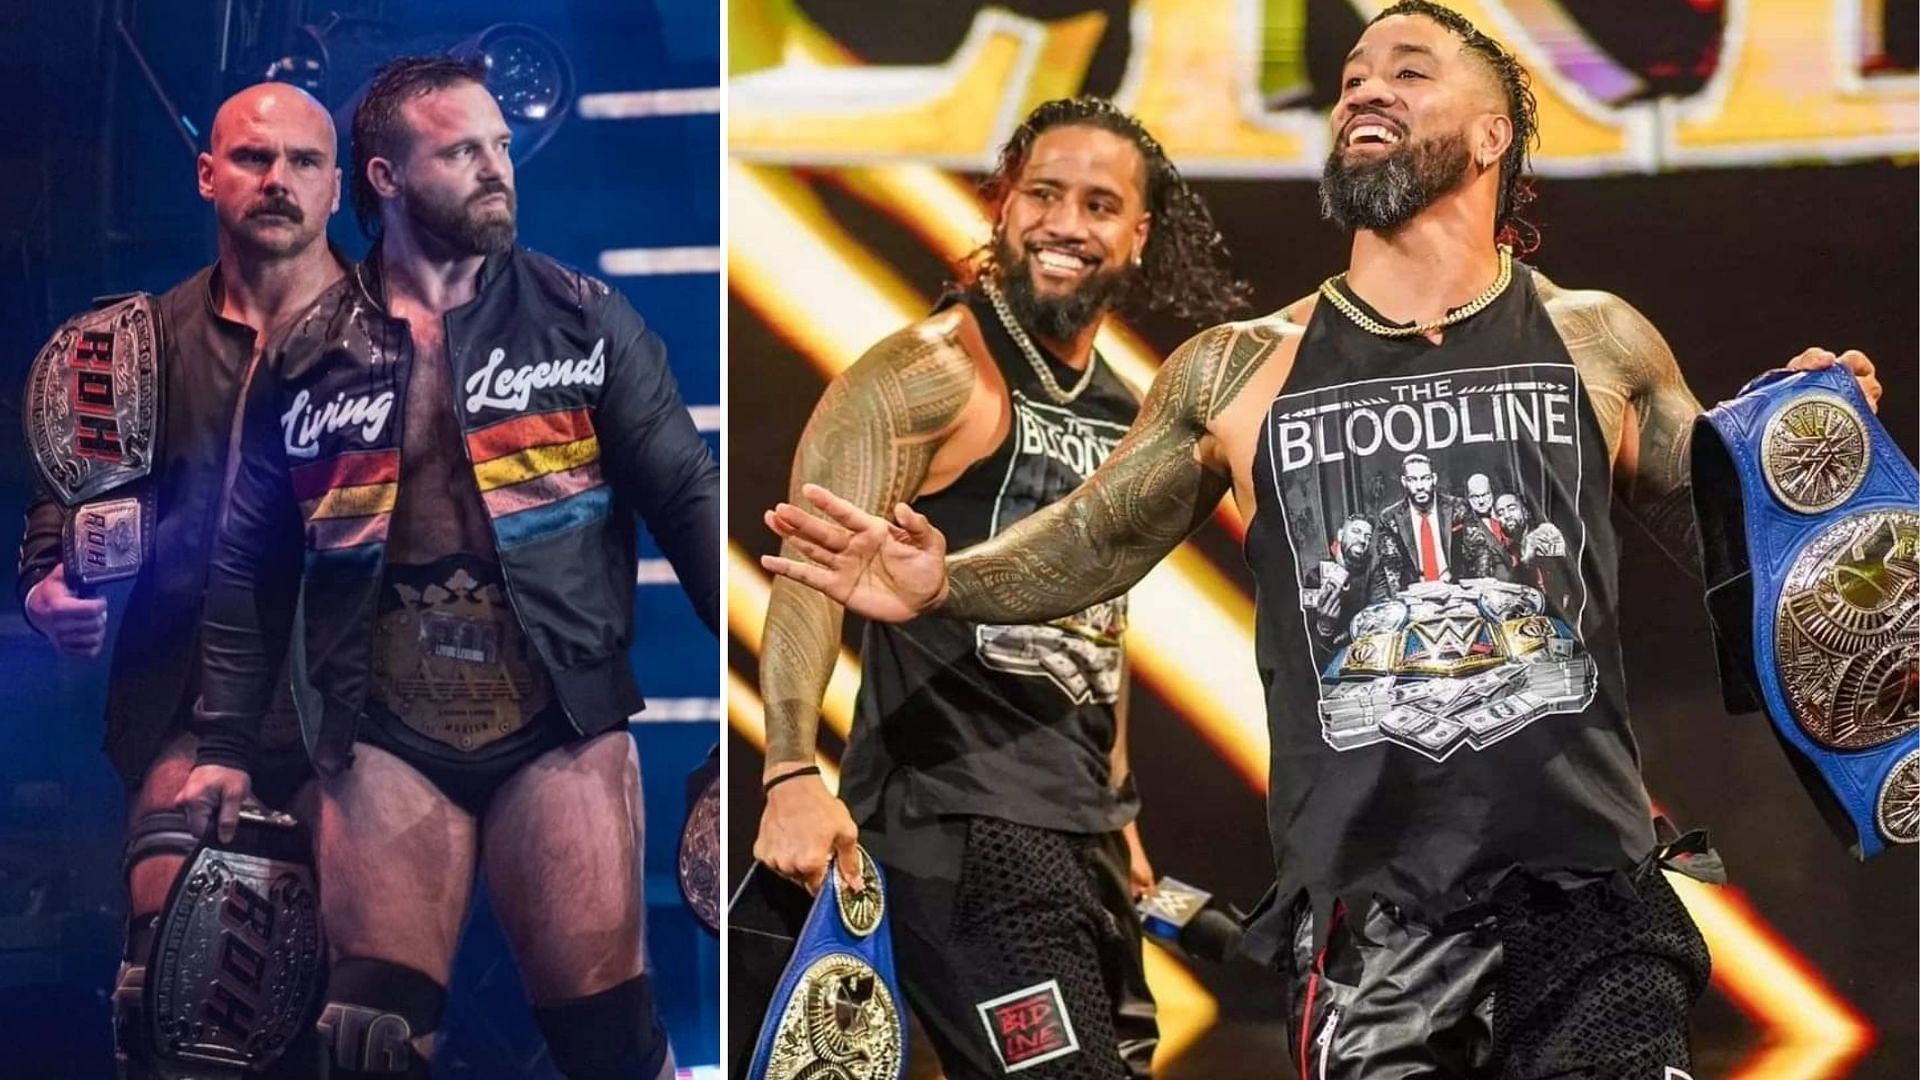 The Usos (right) are ranked #1 Tag Team of the Year by PWI